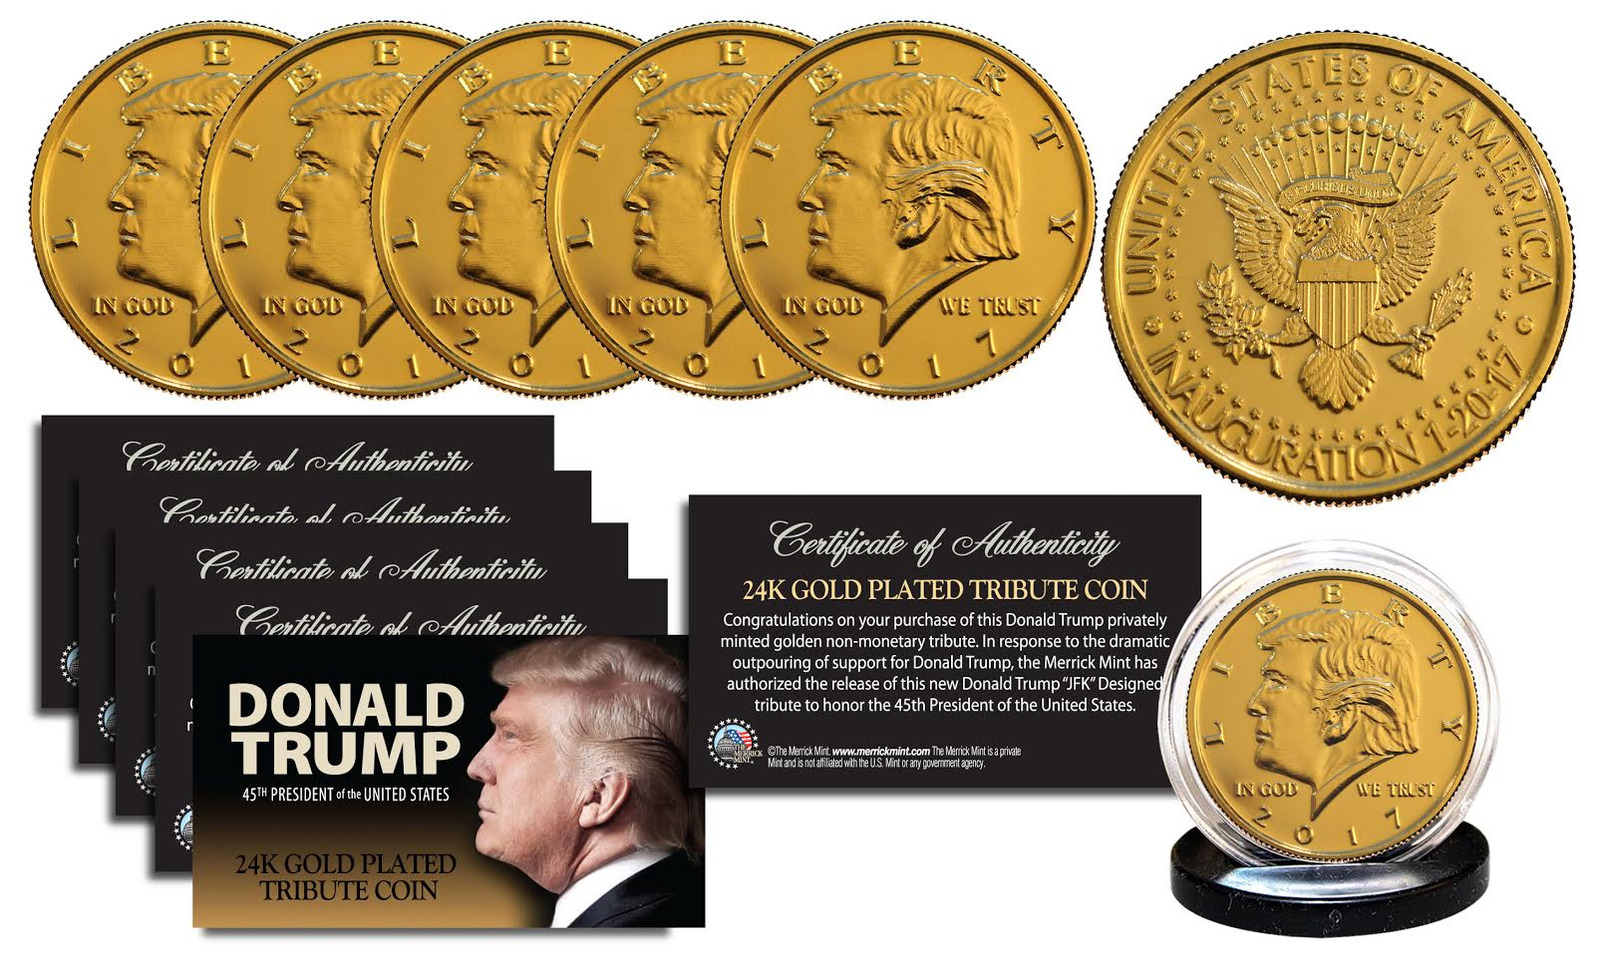 2017 DONALD TRUMP Inauguration 24K Gold Plated 12 GRAMS Tribute Coin (Lot of 5)